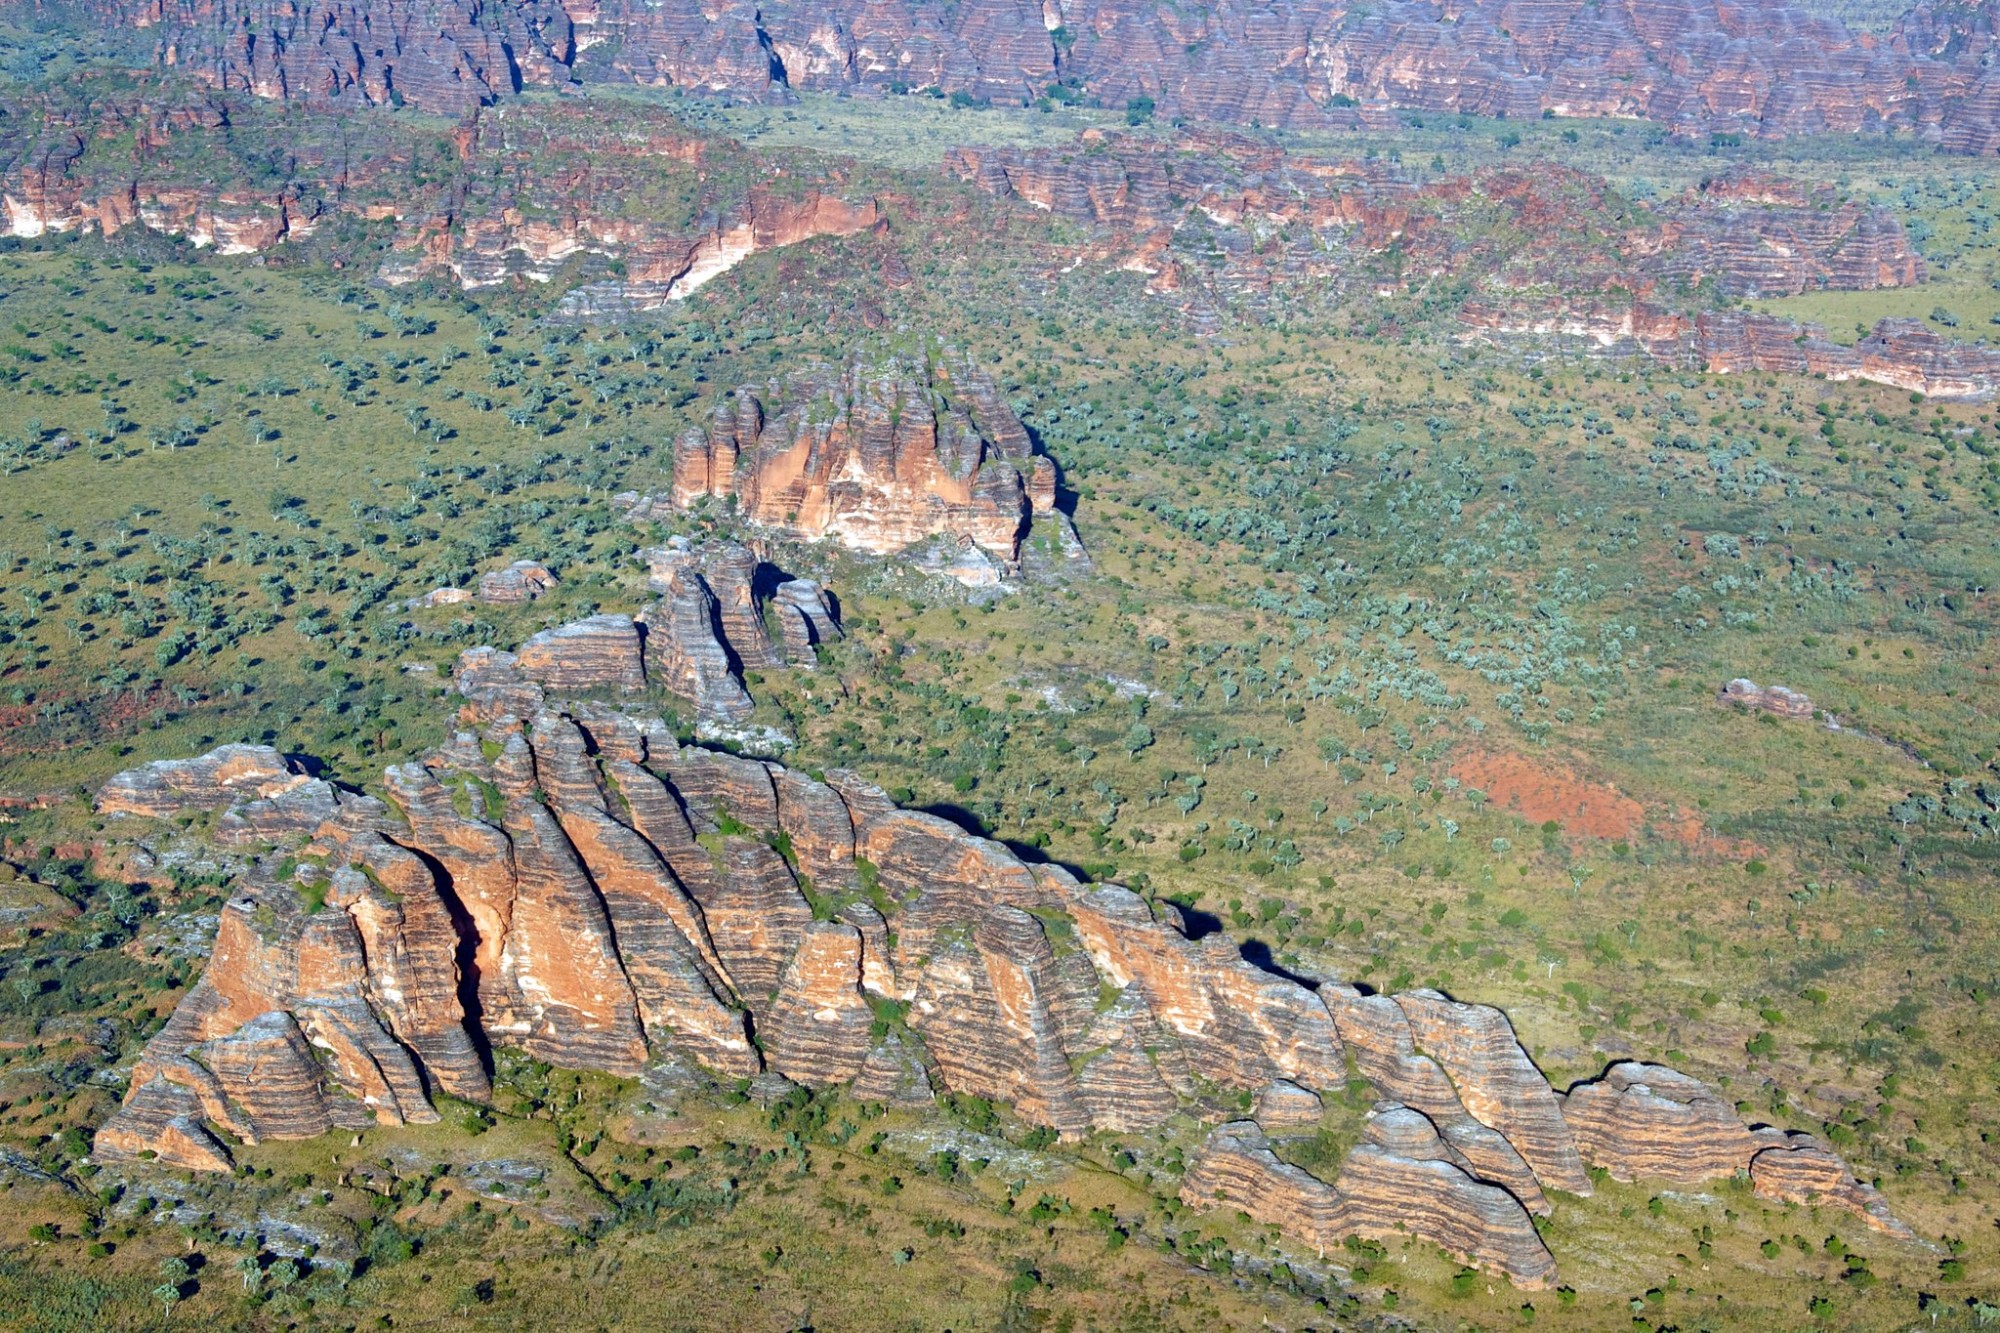 According to researchers, the Bungle Bungle Range owes its appearance to a series of geological processes that unfolded approximately 375 to 350 million years ago.